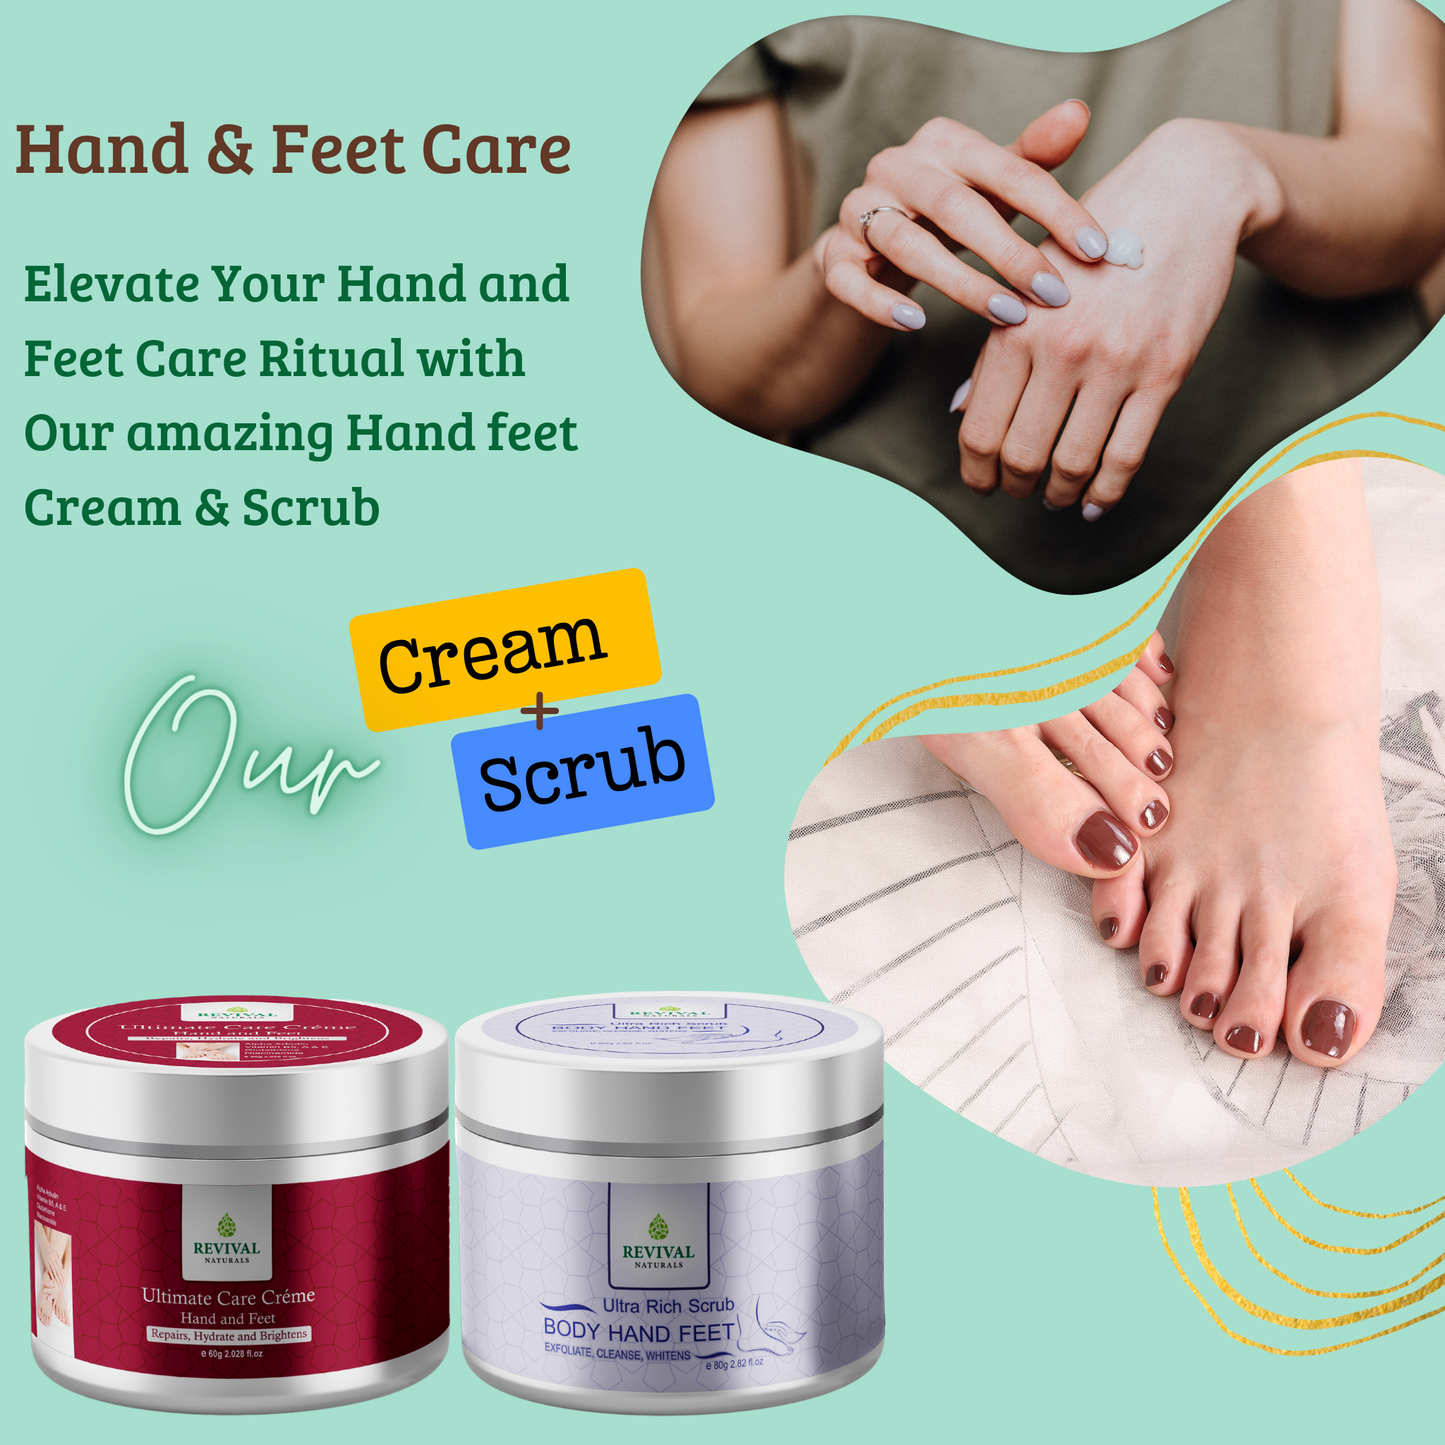 Hand & Feet Care Bundle (2 in 1)